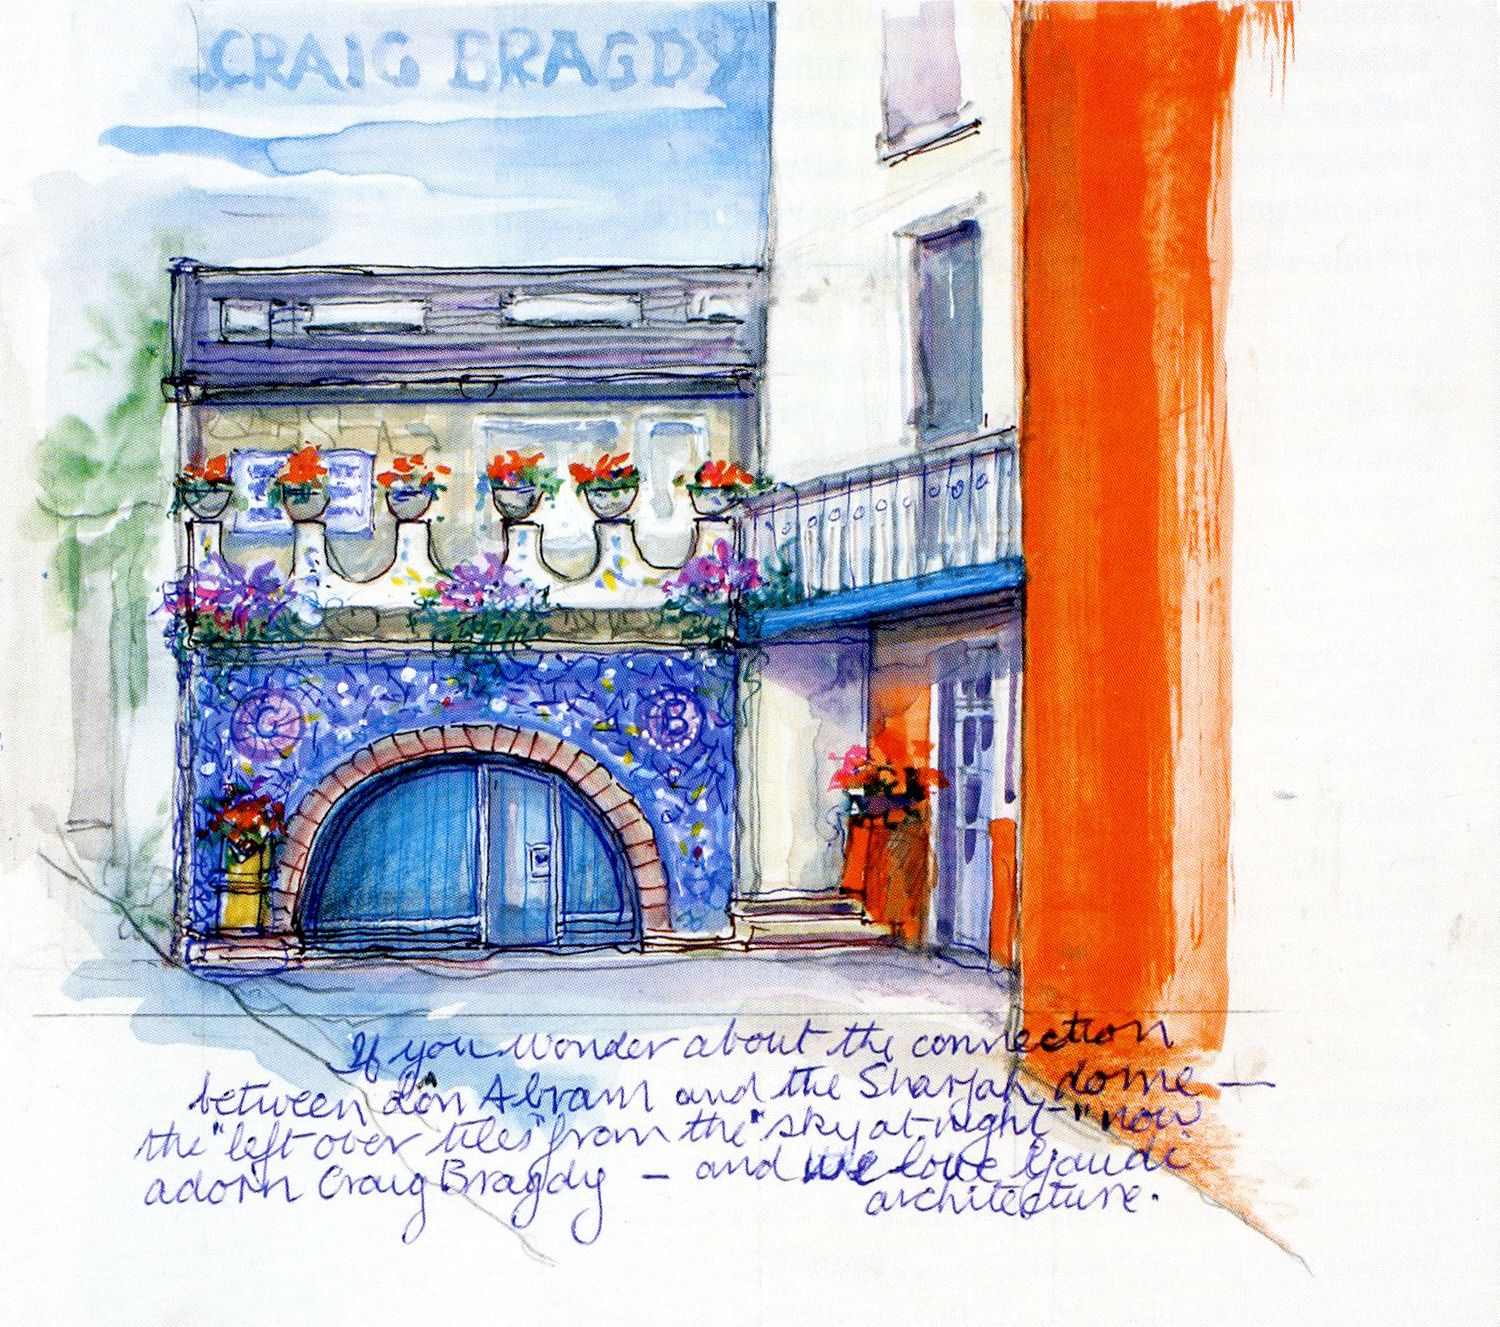 Craig Bragdy, Lon Abram – Jean’s home and studio. Illustration is taken from Jean’s book – Earth, Fire and Water.